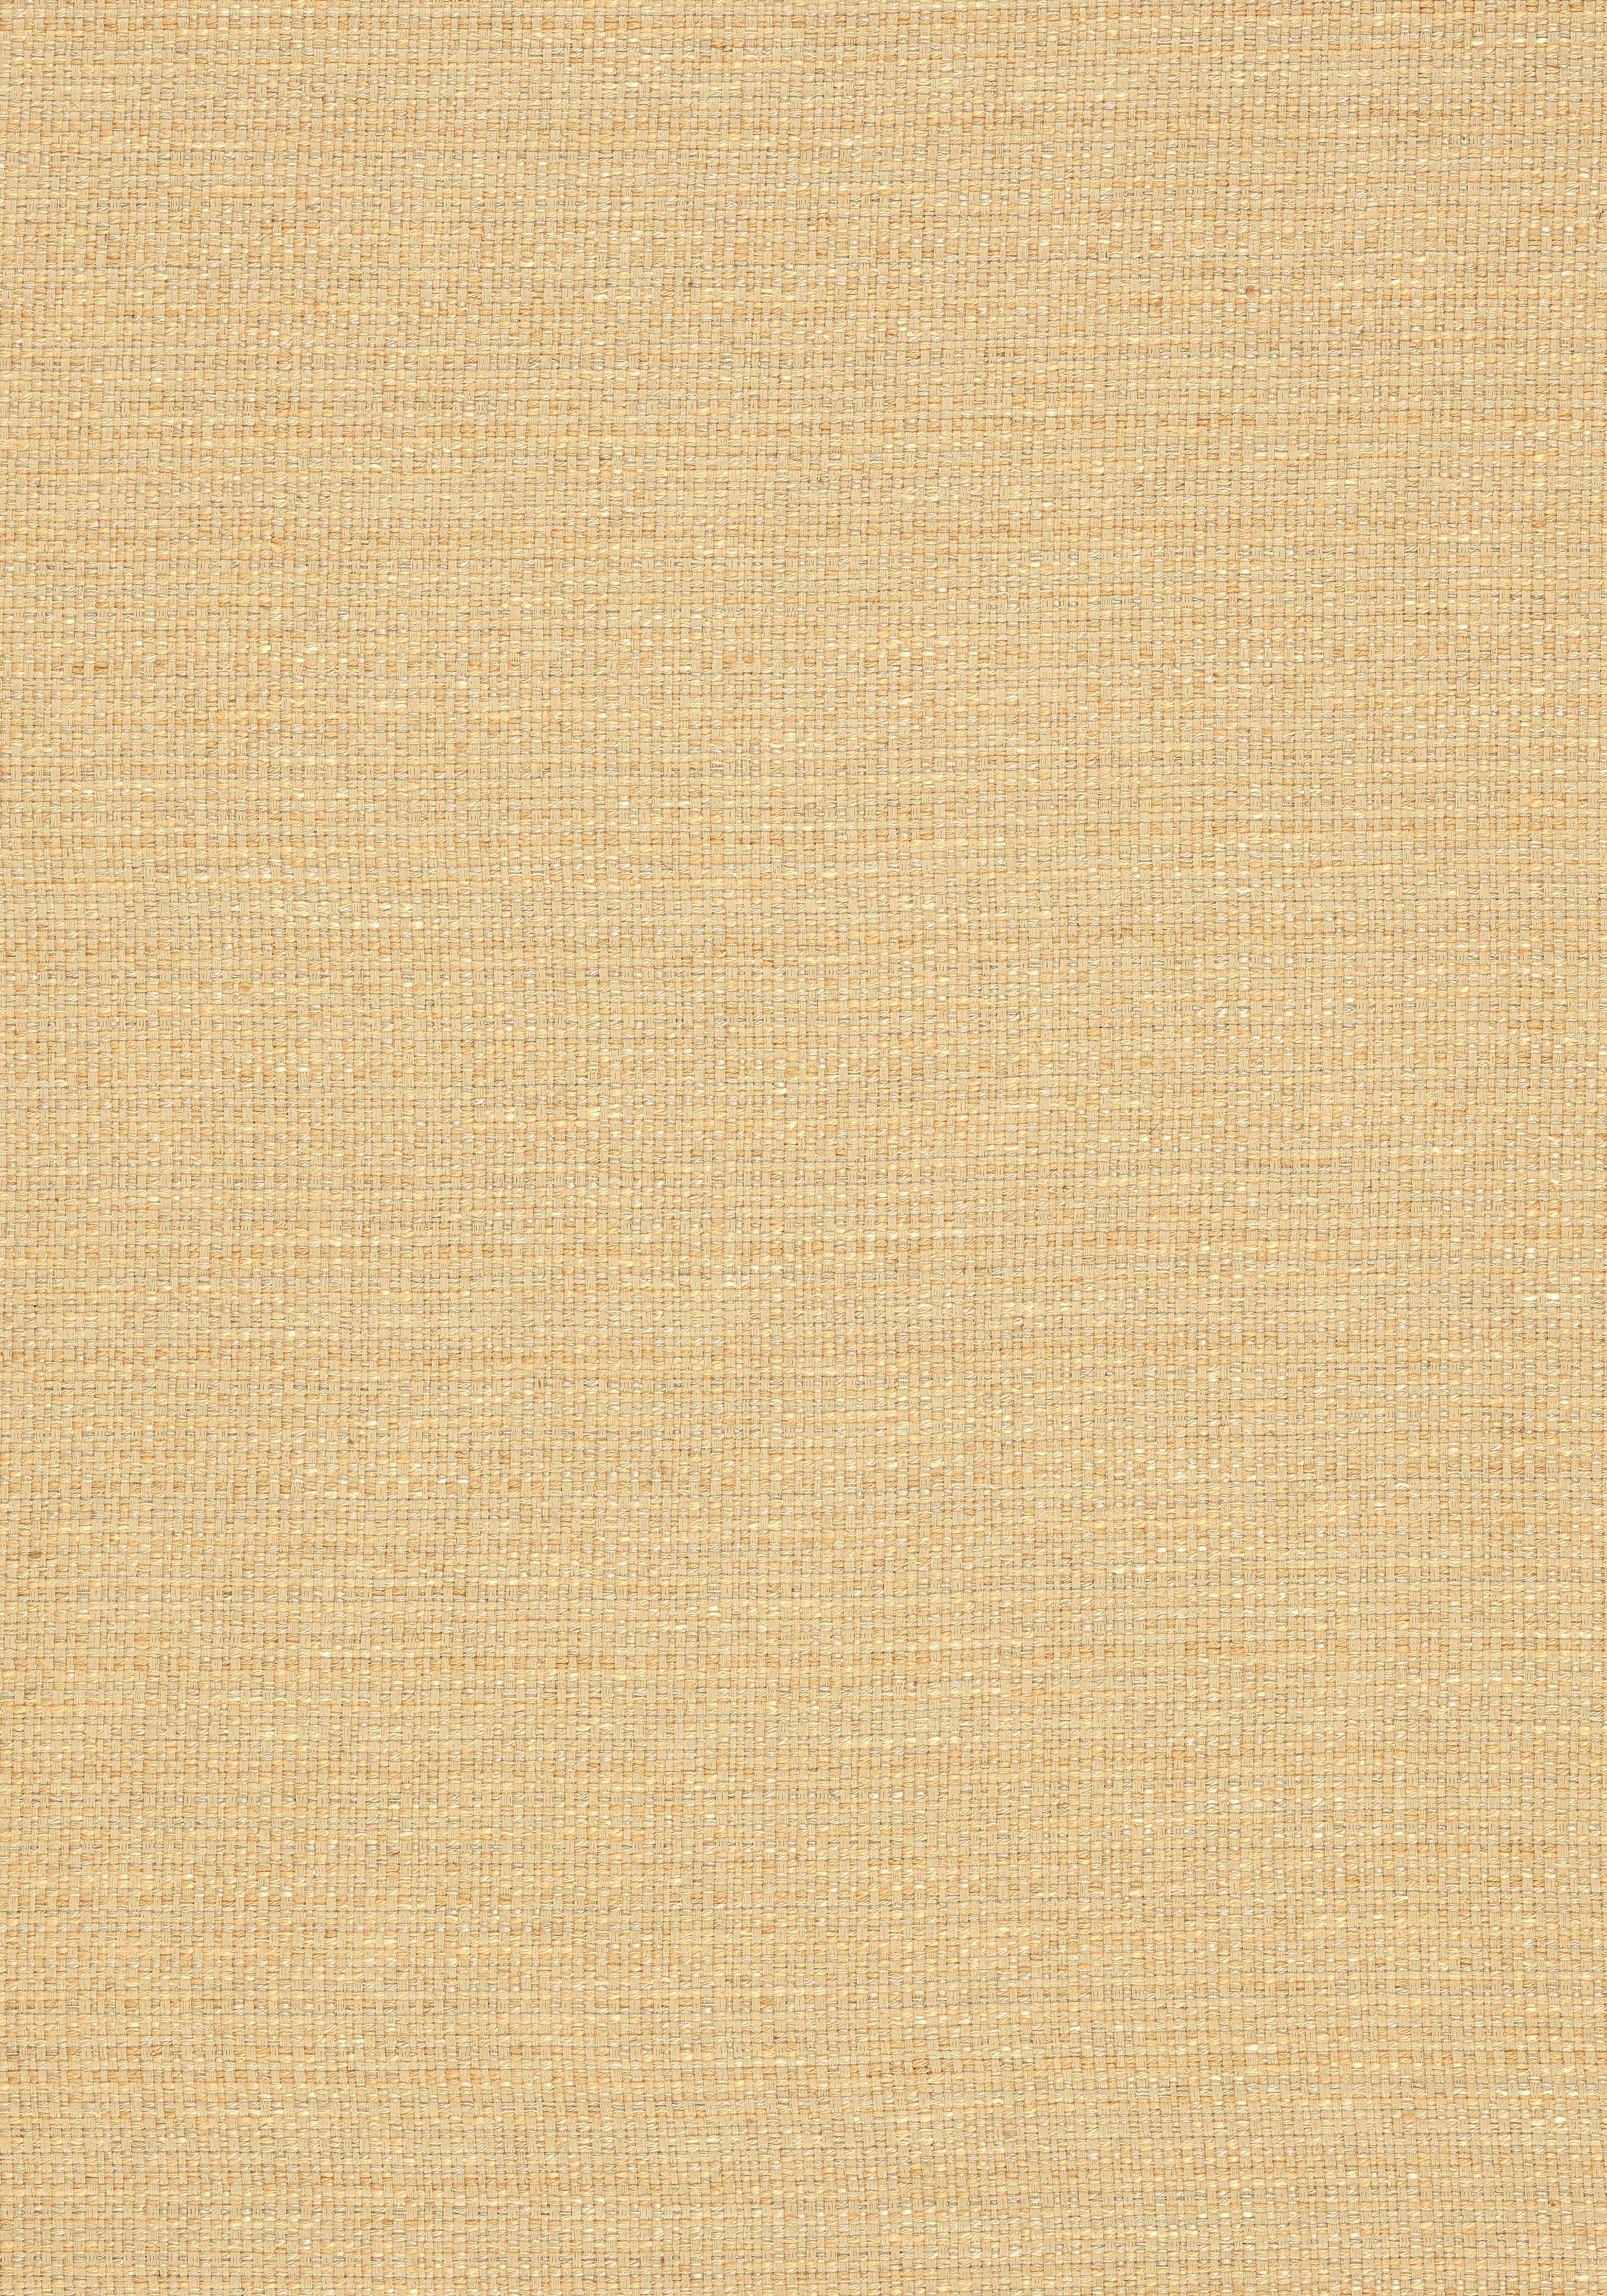 JUTE WEAVE, Camel, W Collection Woven 1: Textures from Thibaut